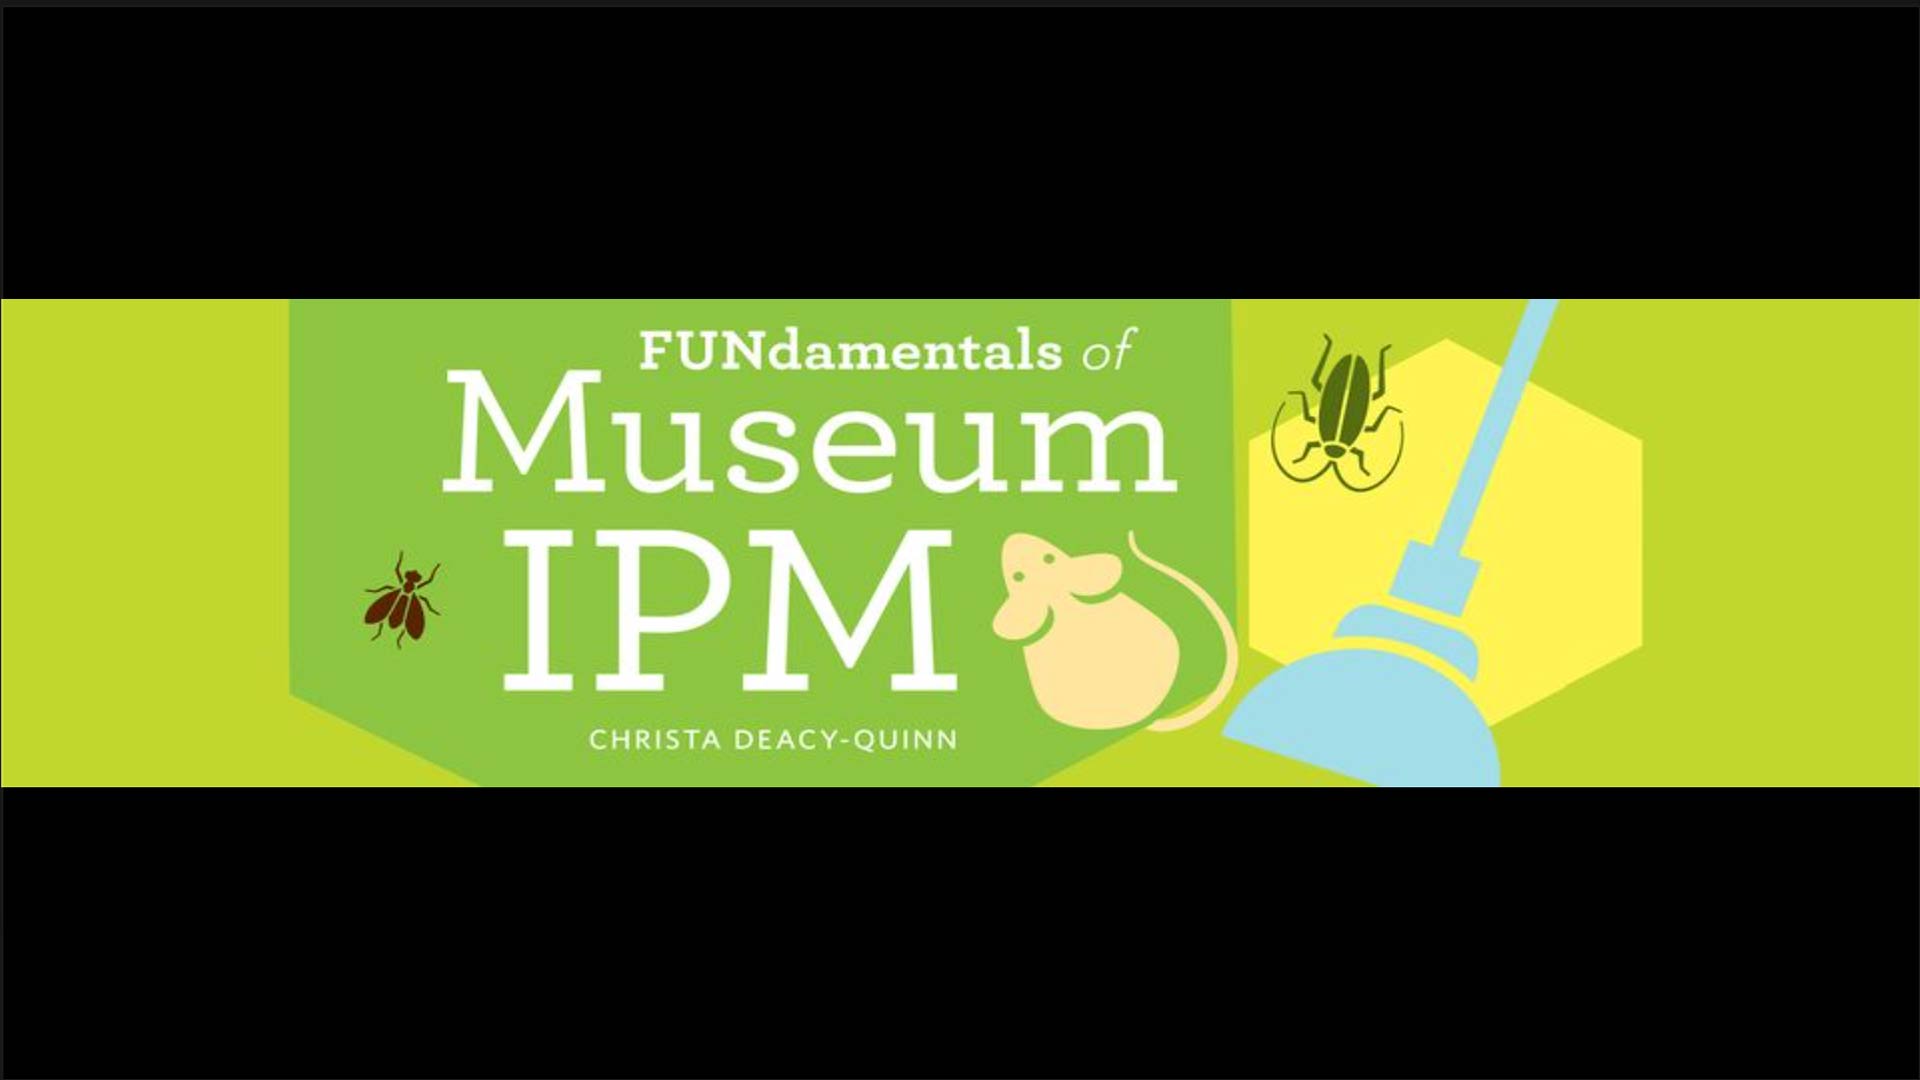 text that says FUNdamentals of Museum IPM Christa Deacy-Quinn with cartoon images of bugs, a mouse, and a broom 